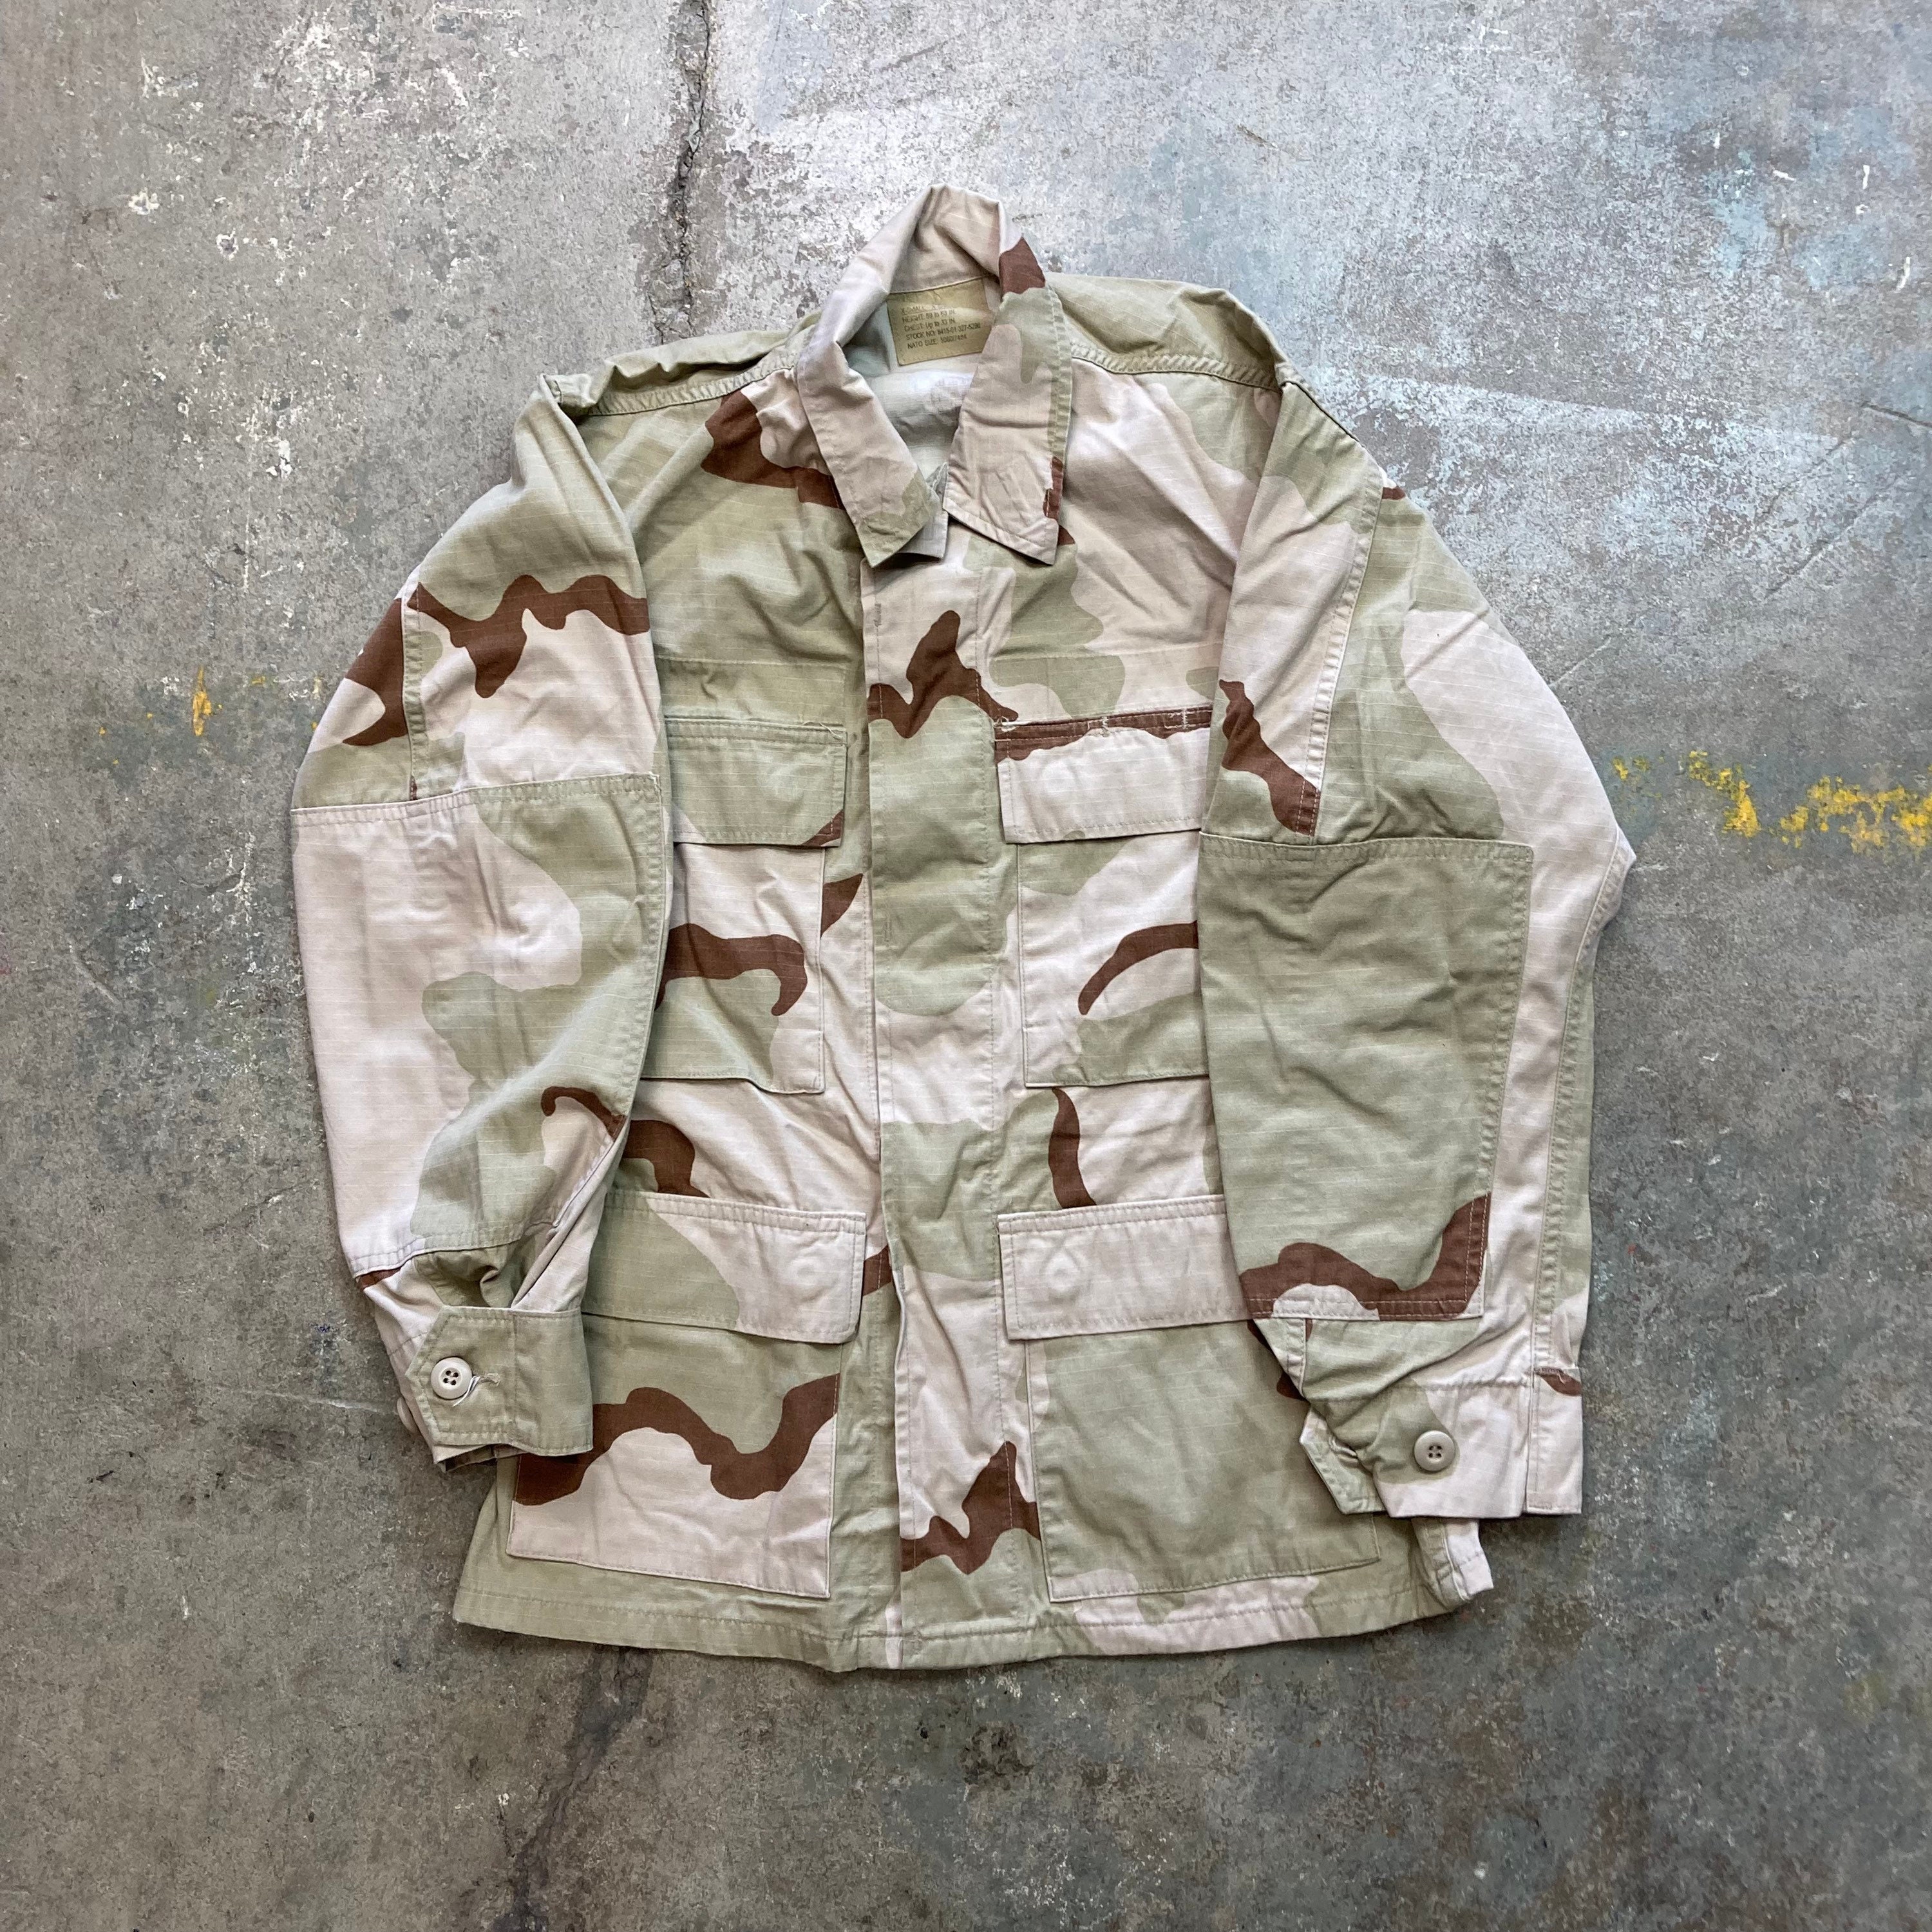 Vintage US Army Desert Camo M-65 Made in USA Jacket Coat Sz 